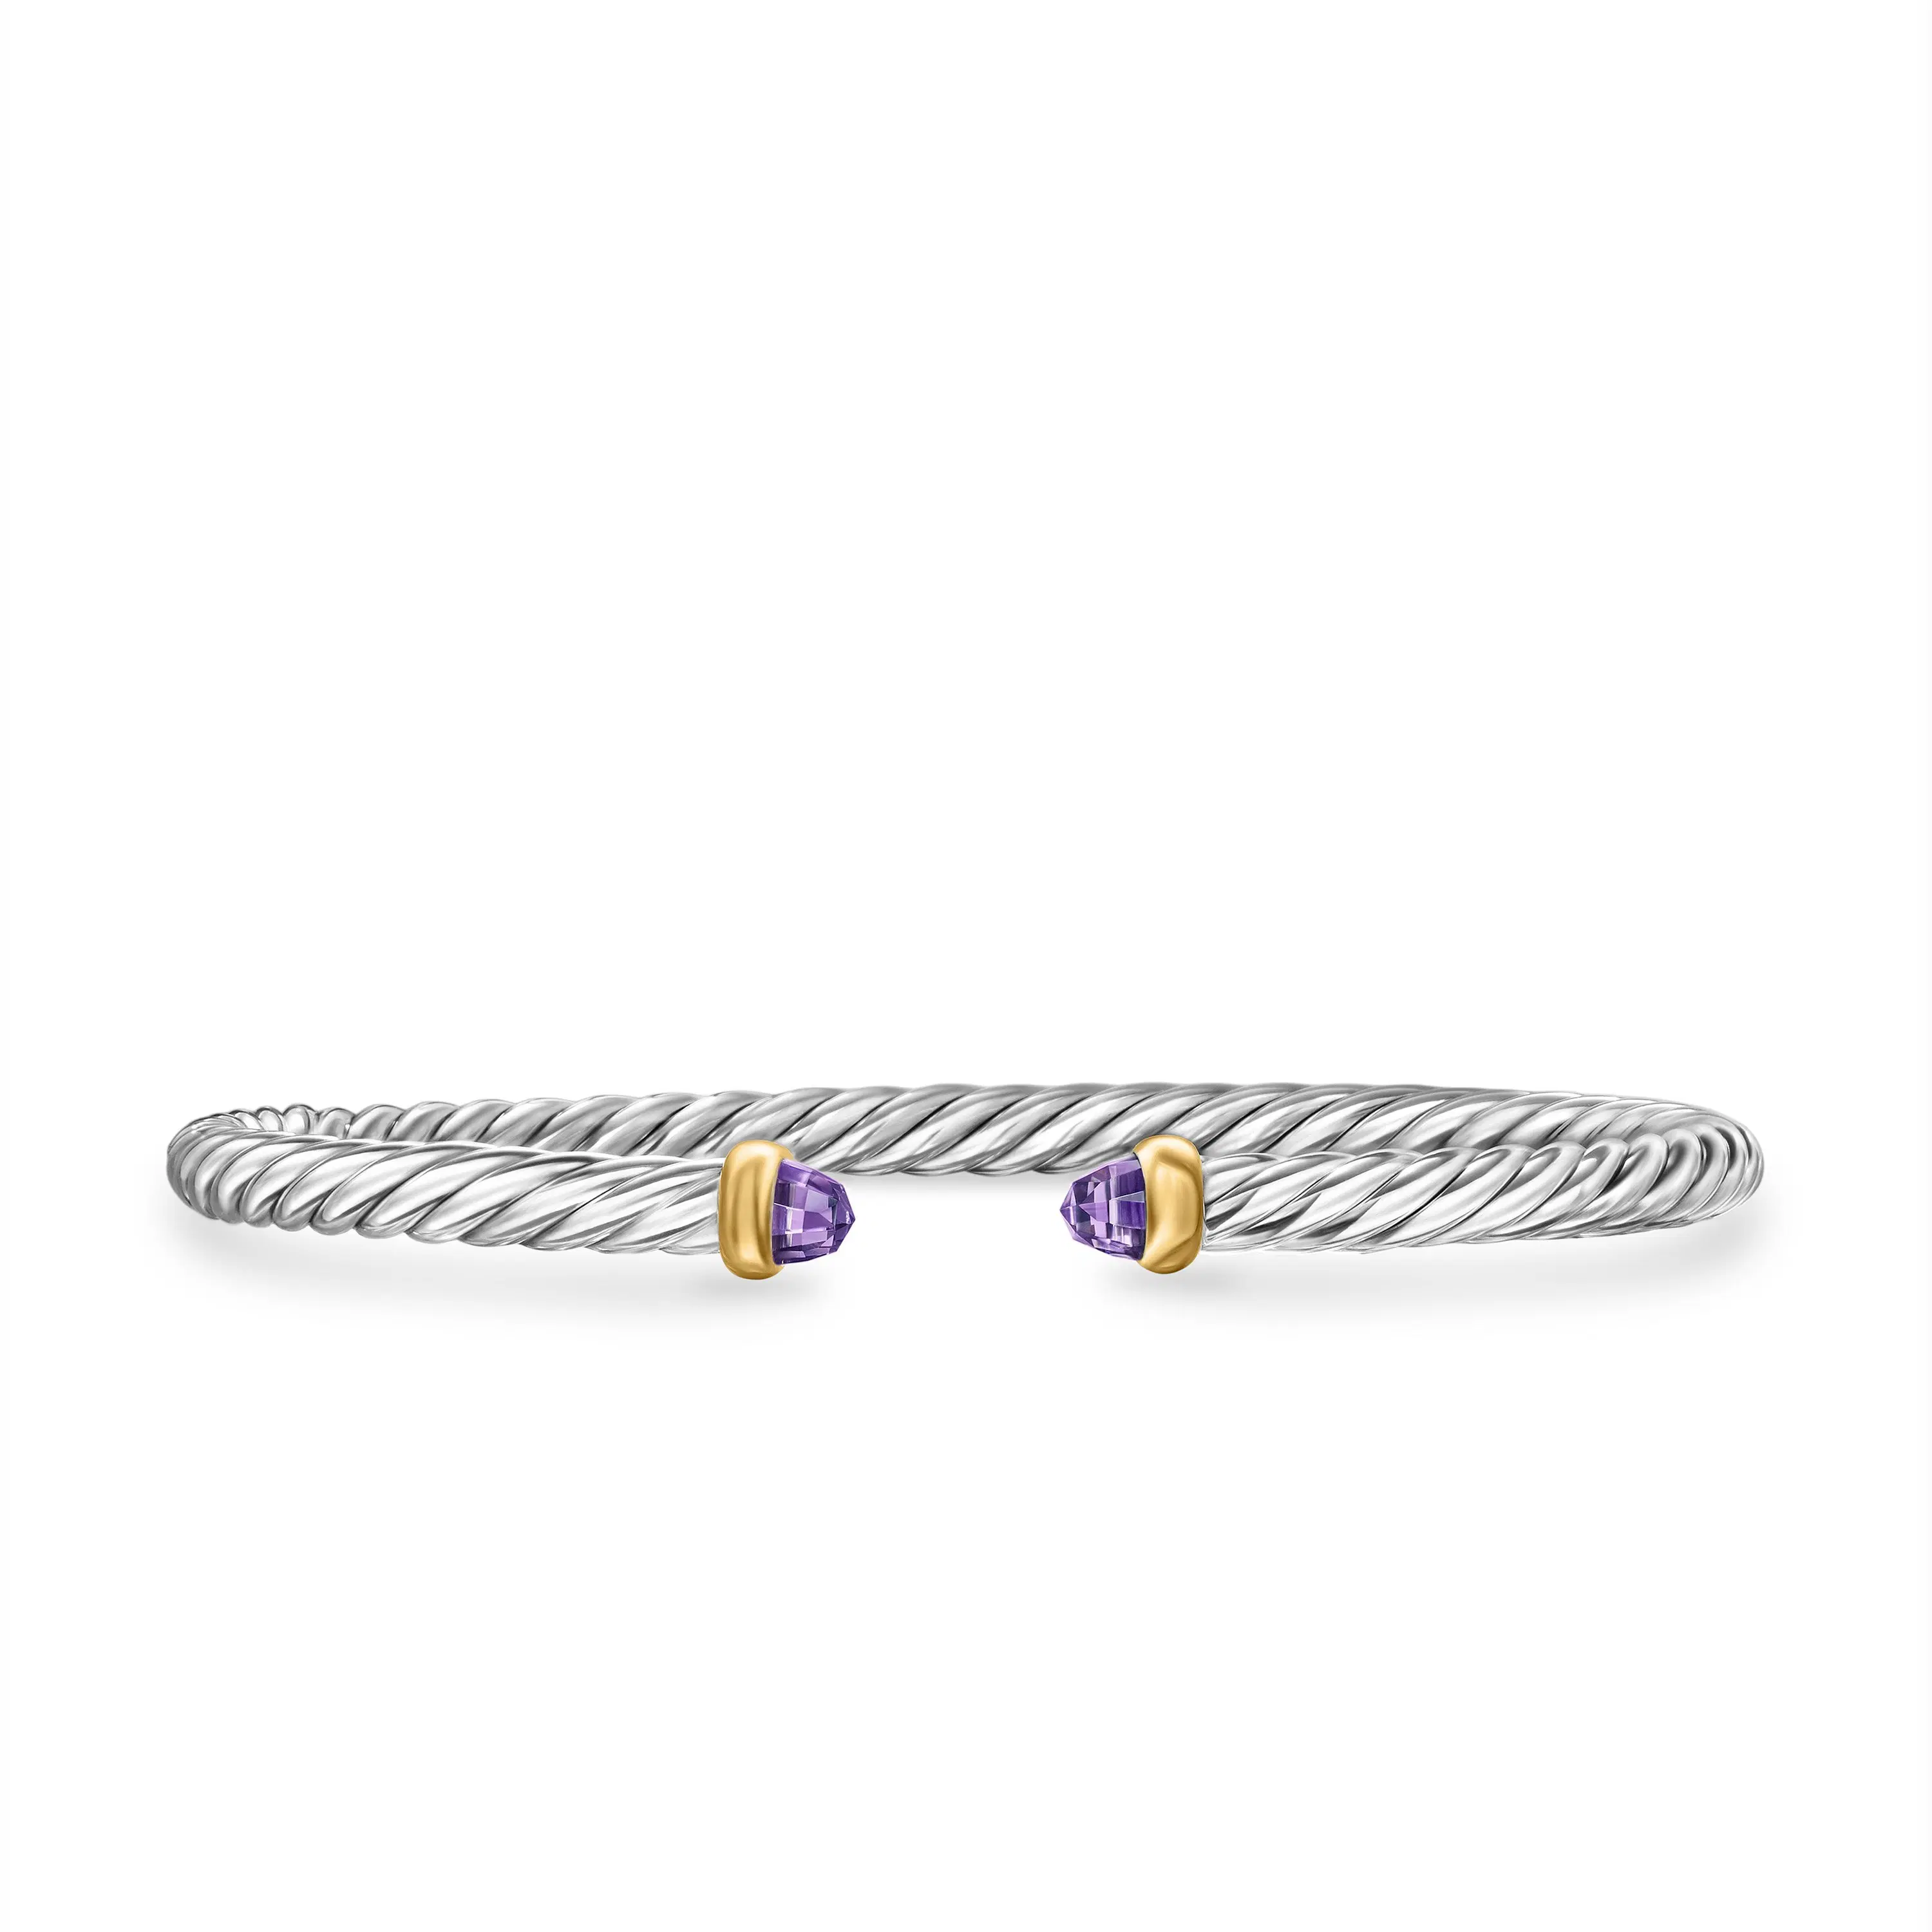 David Yurman Cable Flex Sterling Silver Bracelet with Amethyst, Size Small 0